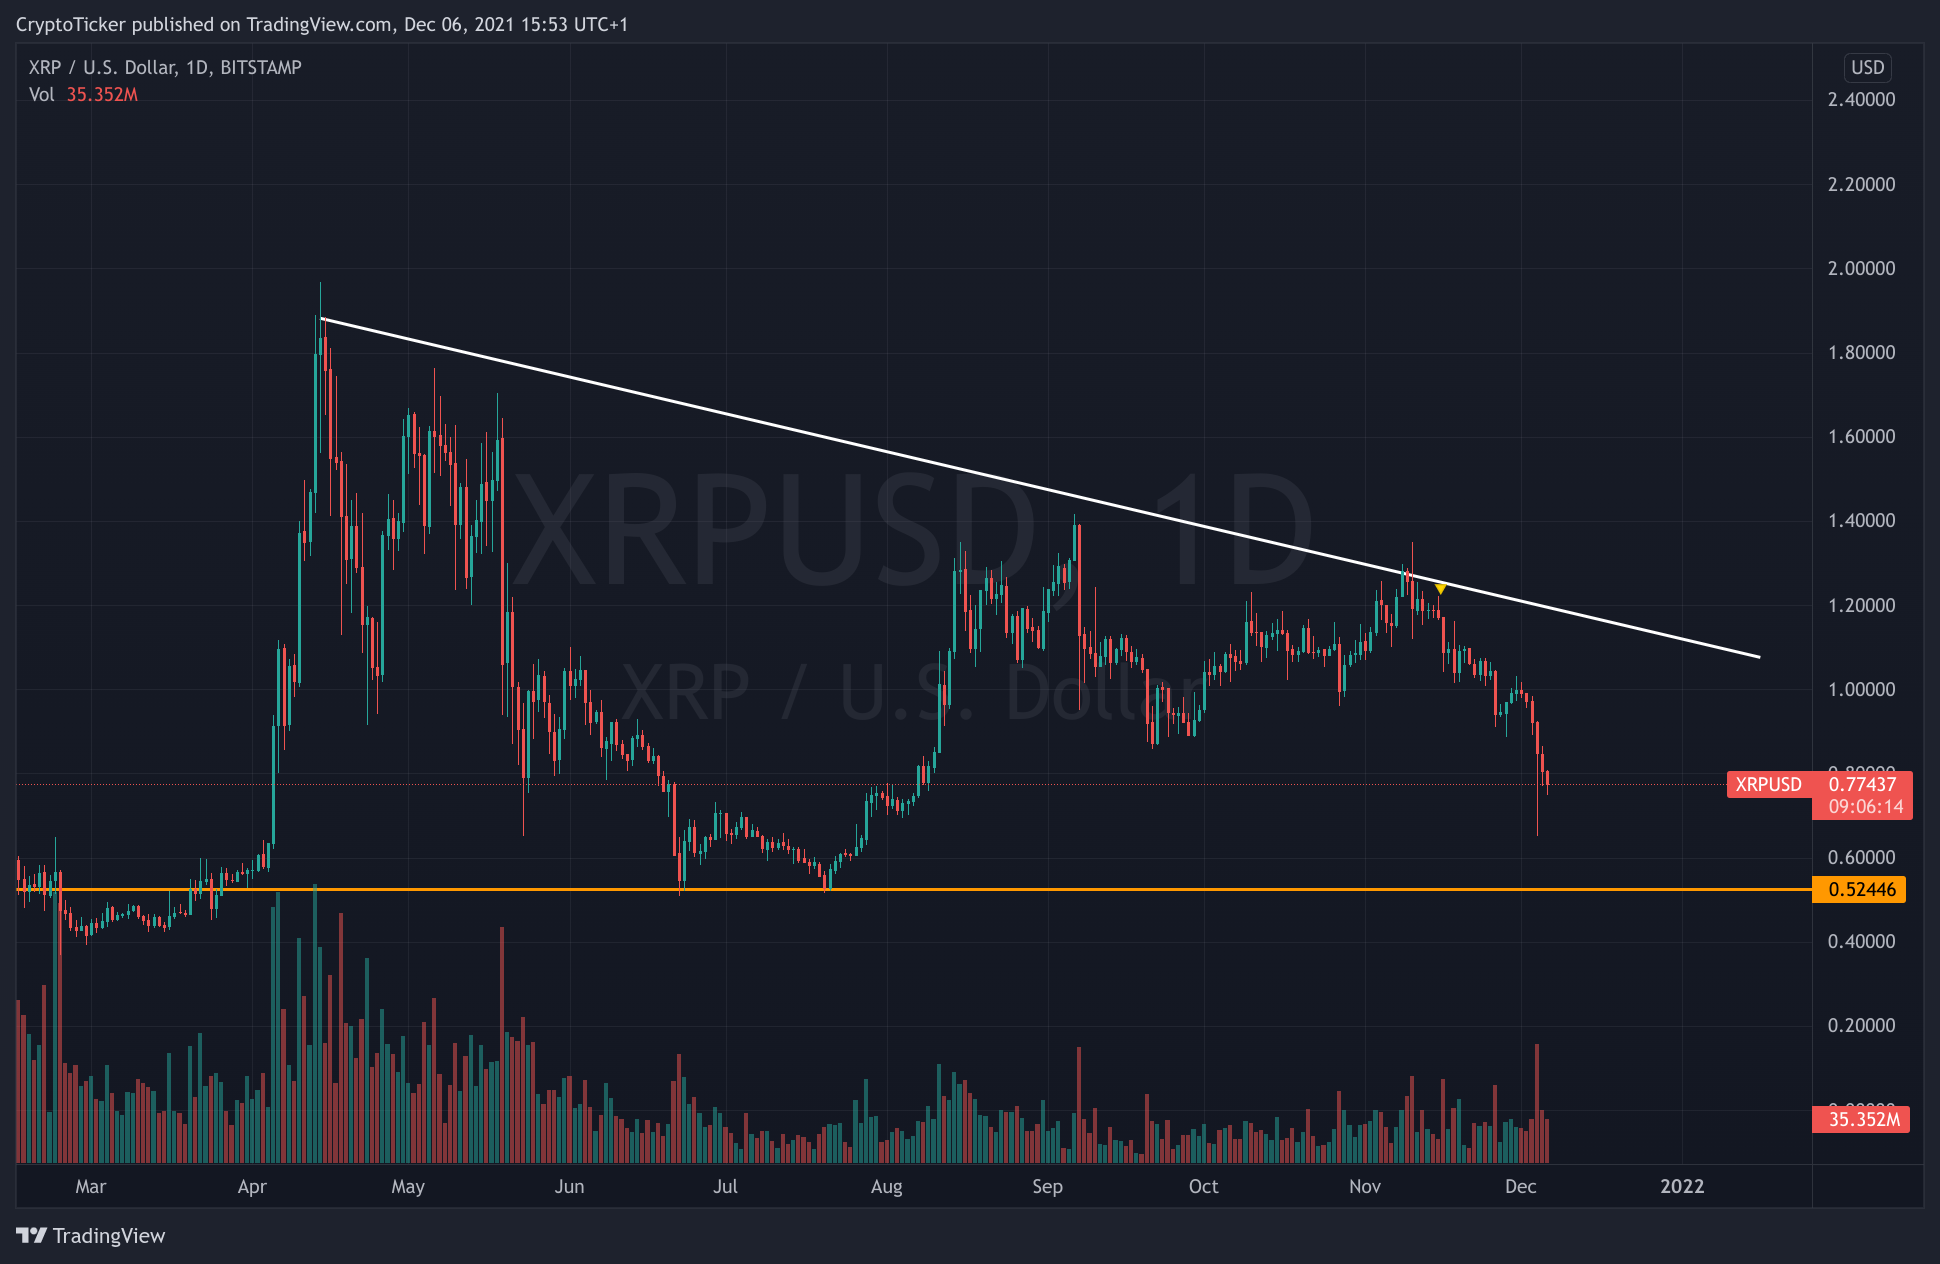 XRP/USD 1-day chart showing the downtrend of XRP